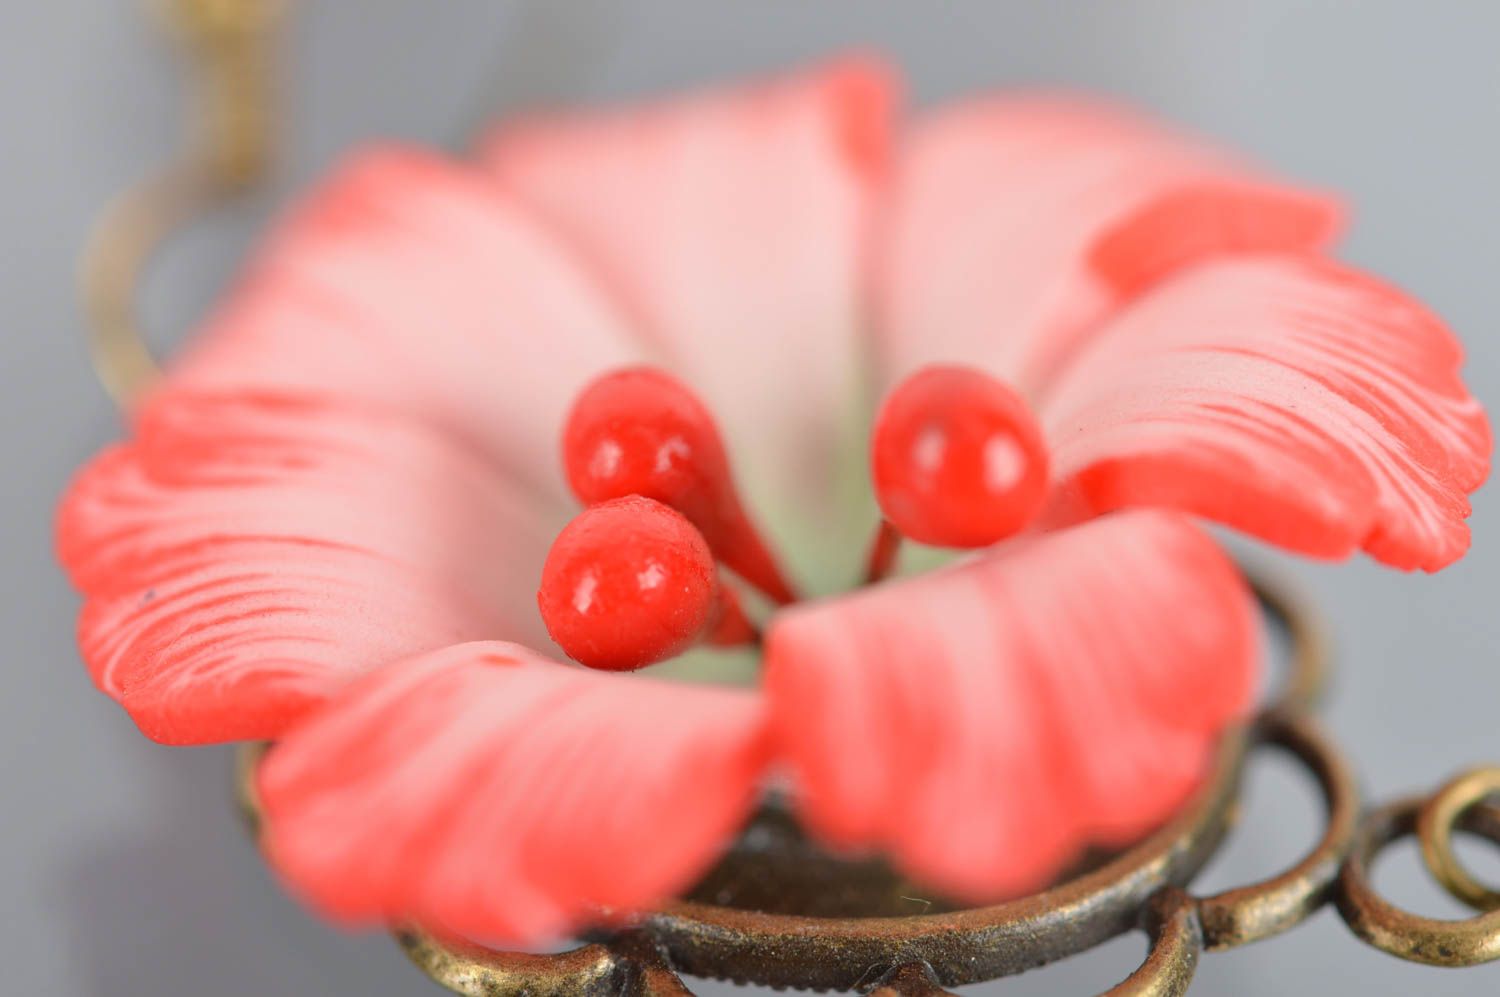 Cute small earrings with flowers made of polymer clay for stylish looks photo 4